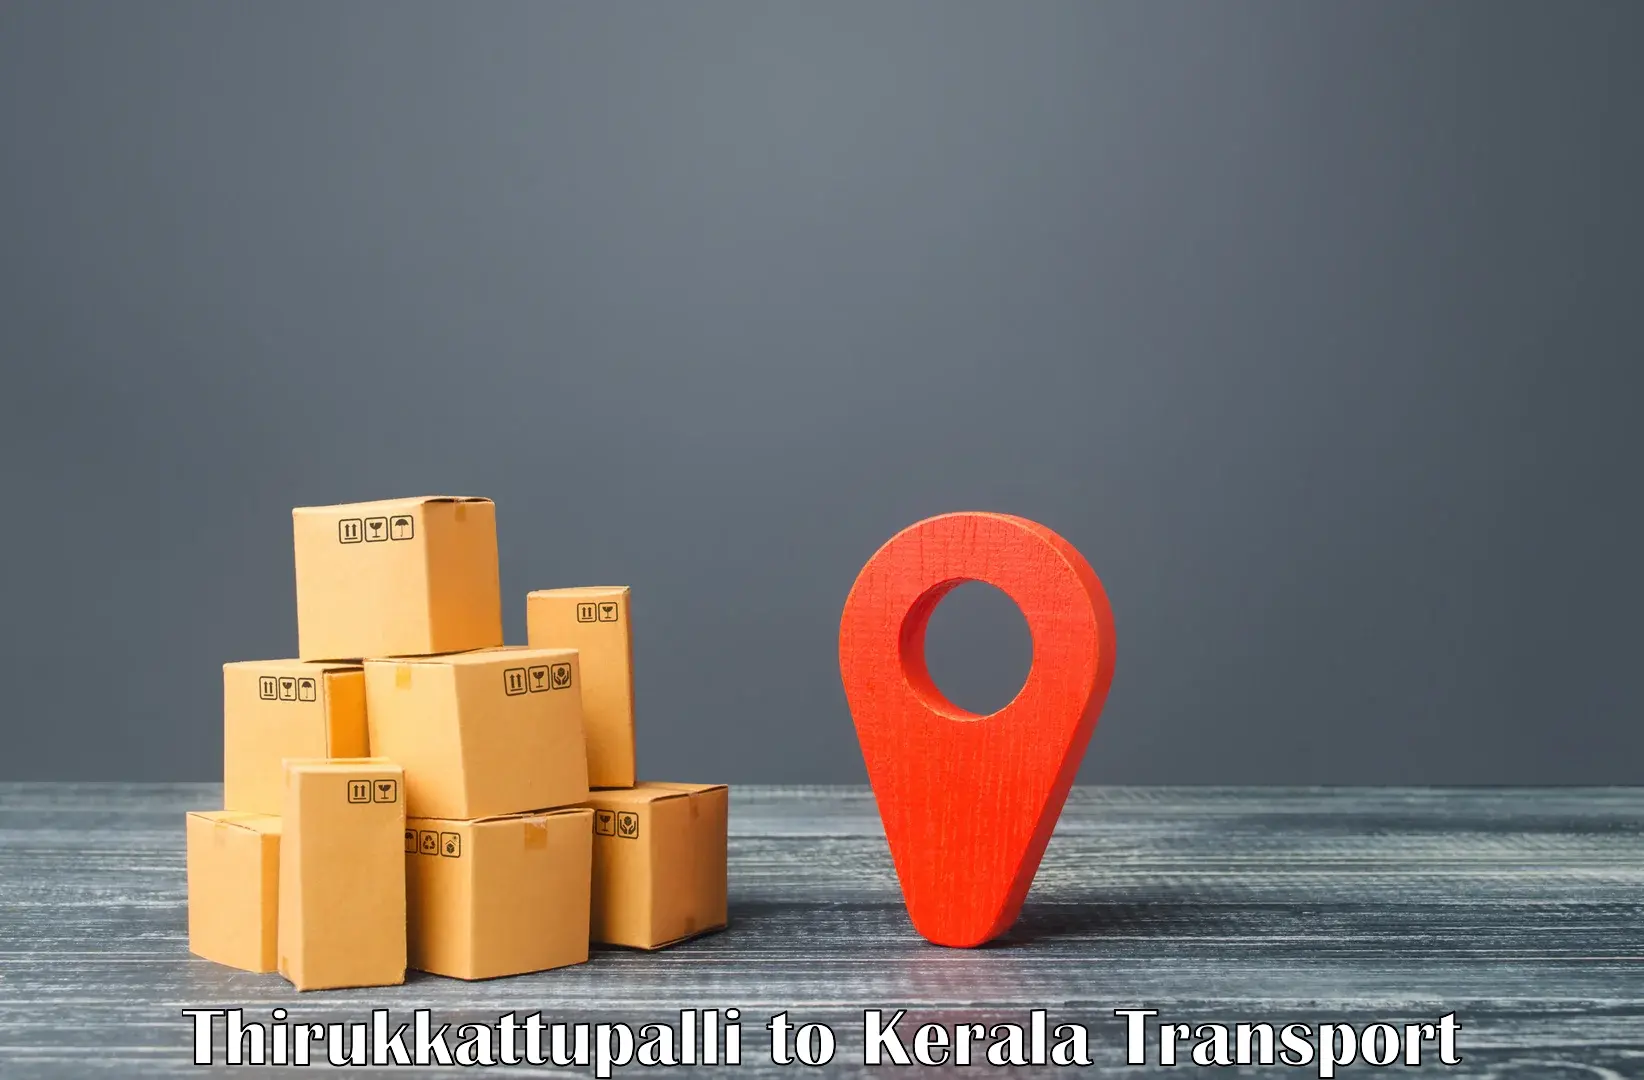 Road transport services in Thirukkattupalli to Cochin University of Science and Technology